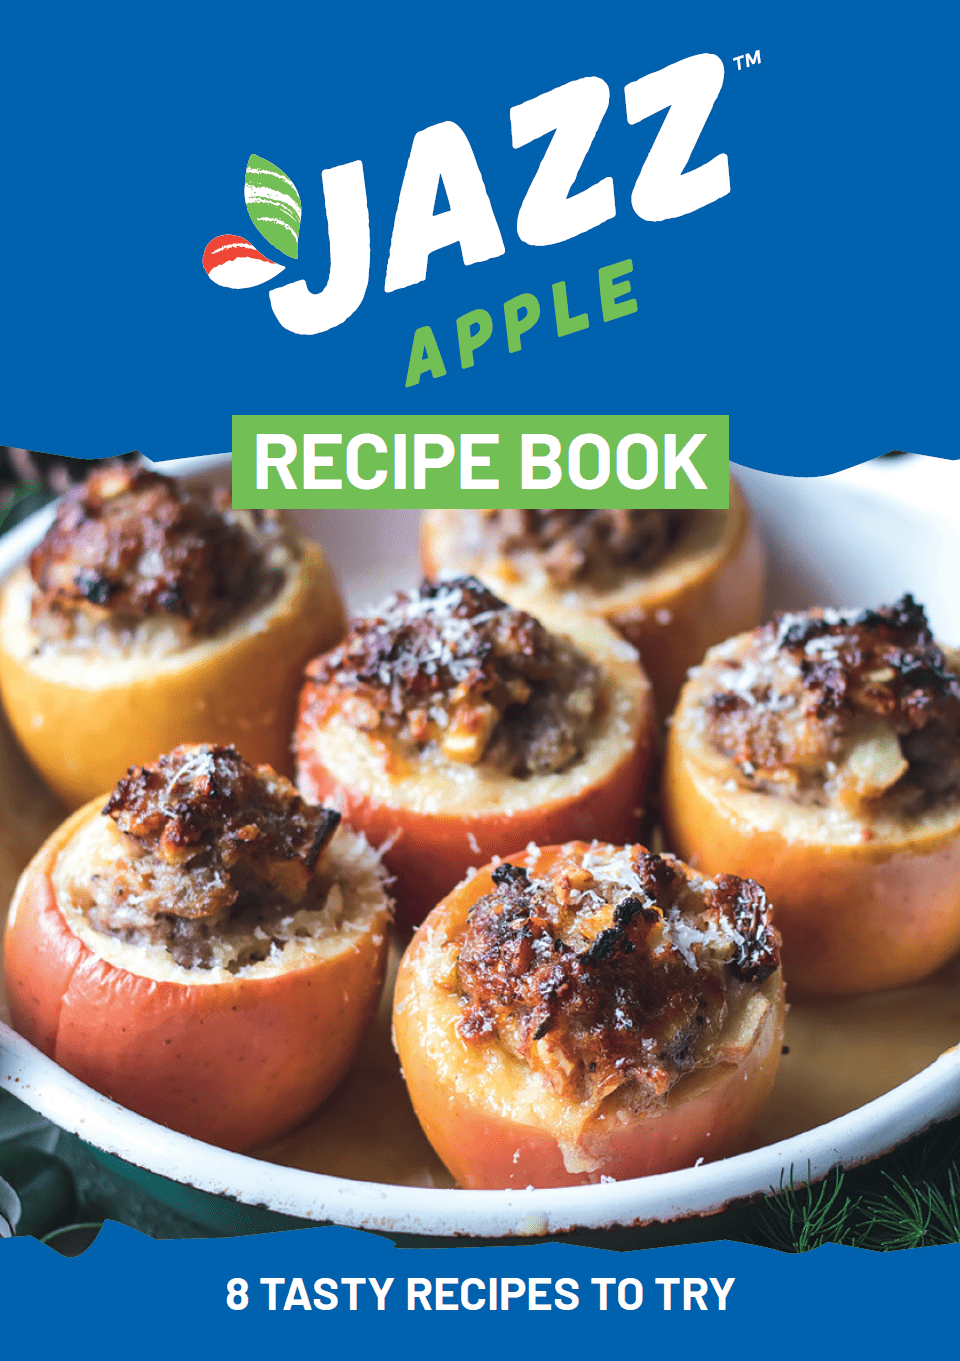 British-Grown JAZZ™ Apples Are Here! And So Is Our New Recipe Book!